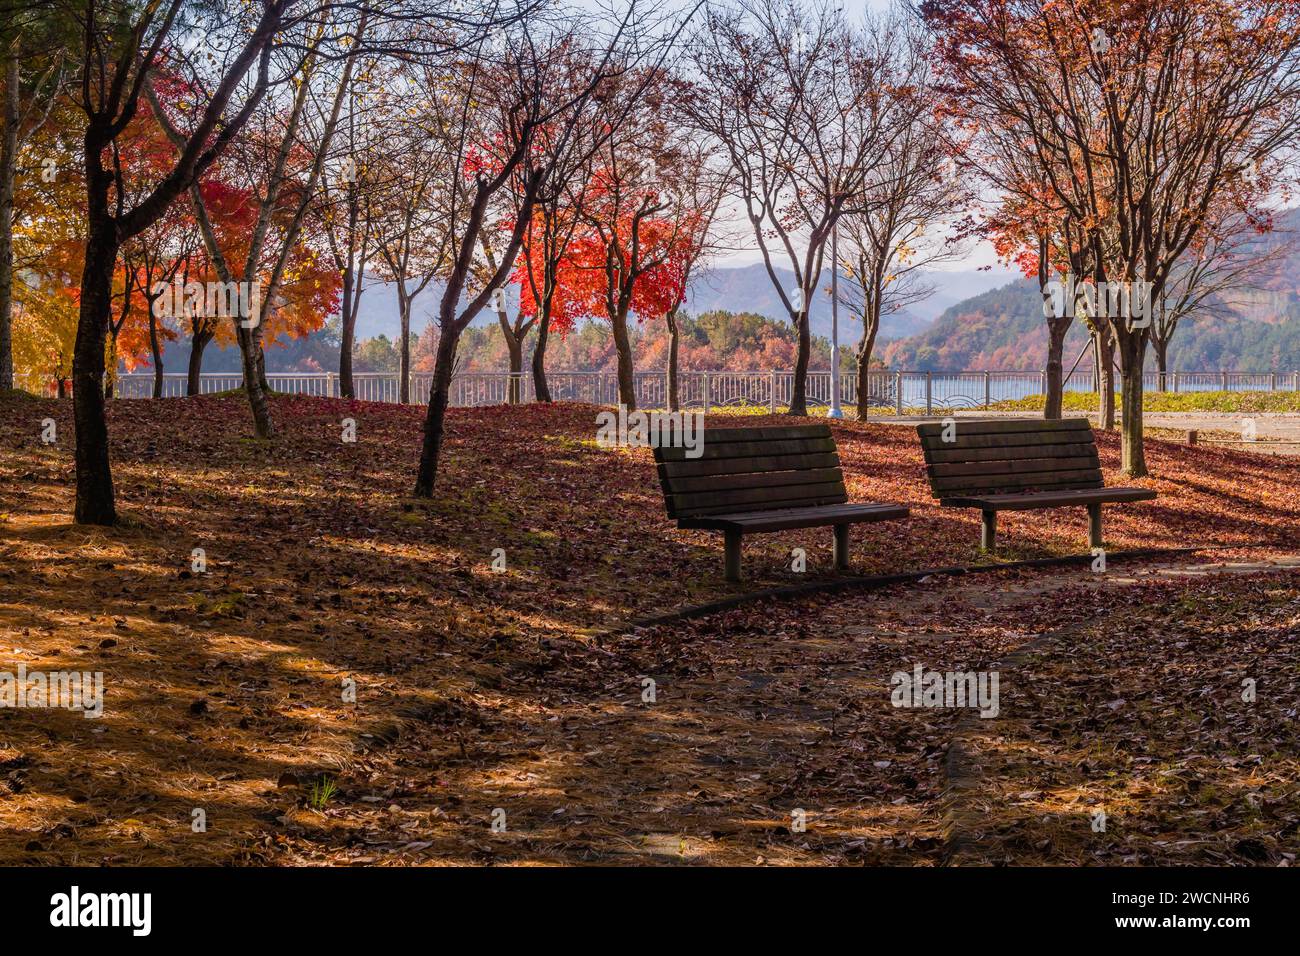 Two wooden park benches next to leaf covered walking trail on autumn day with lake and trees in beautiful fall colors in background Stock Photo